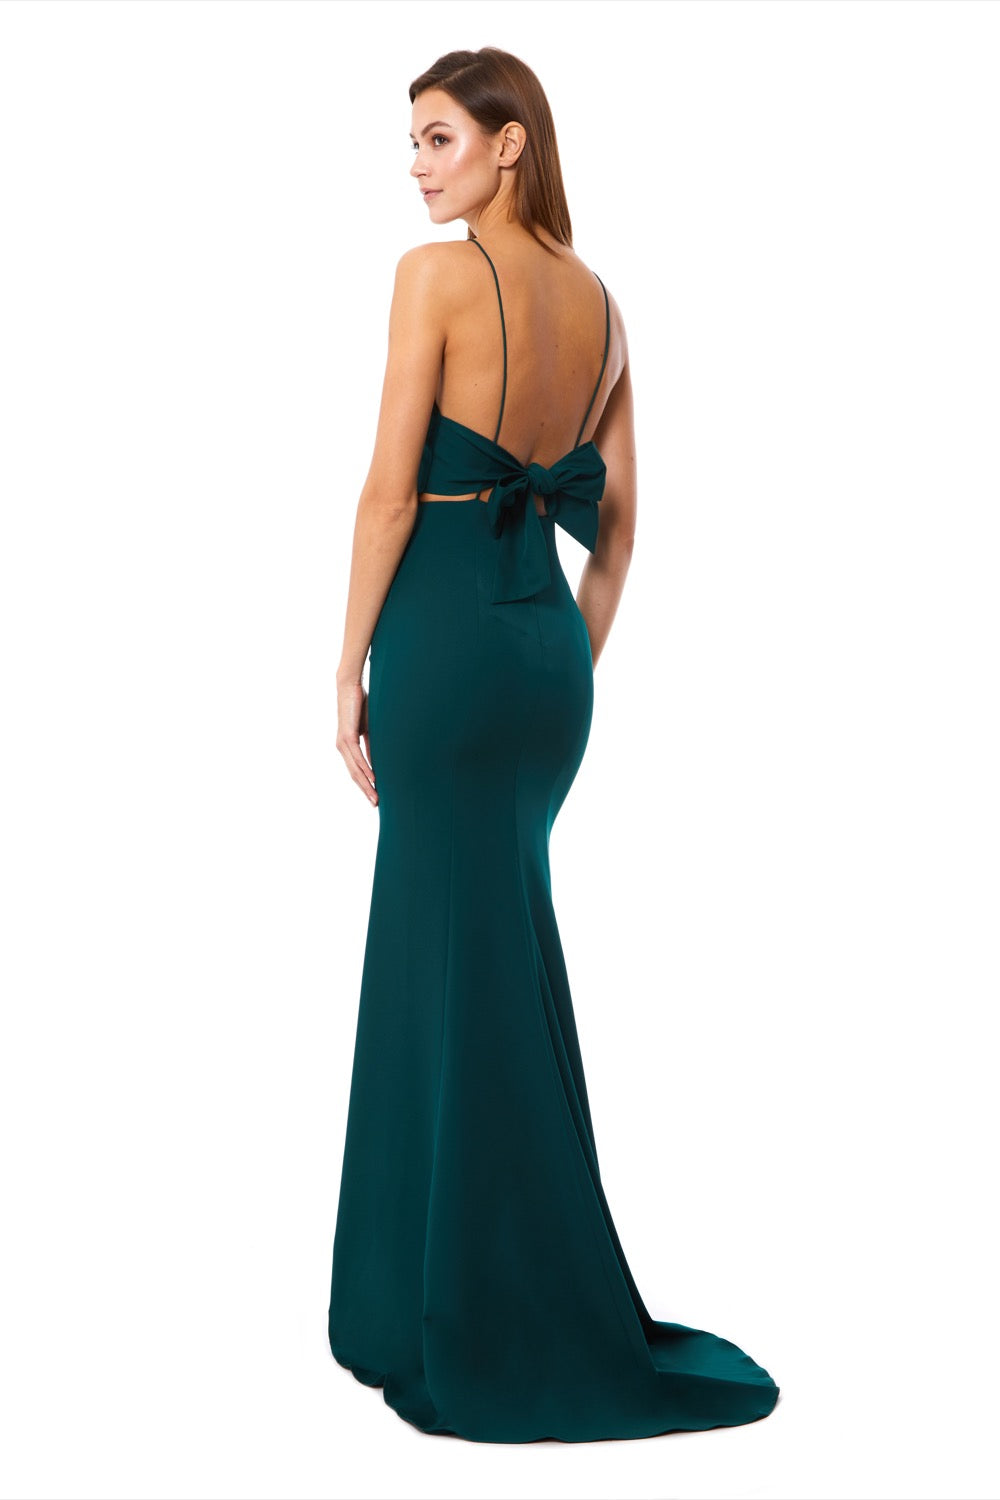 Jemima Square Neck Maxi Dress with Open Back, UK 10 / US 6 / EU 38 / Forest Green